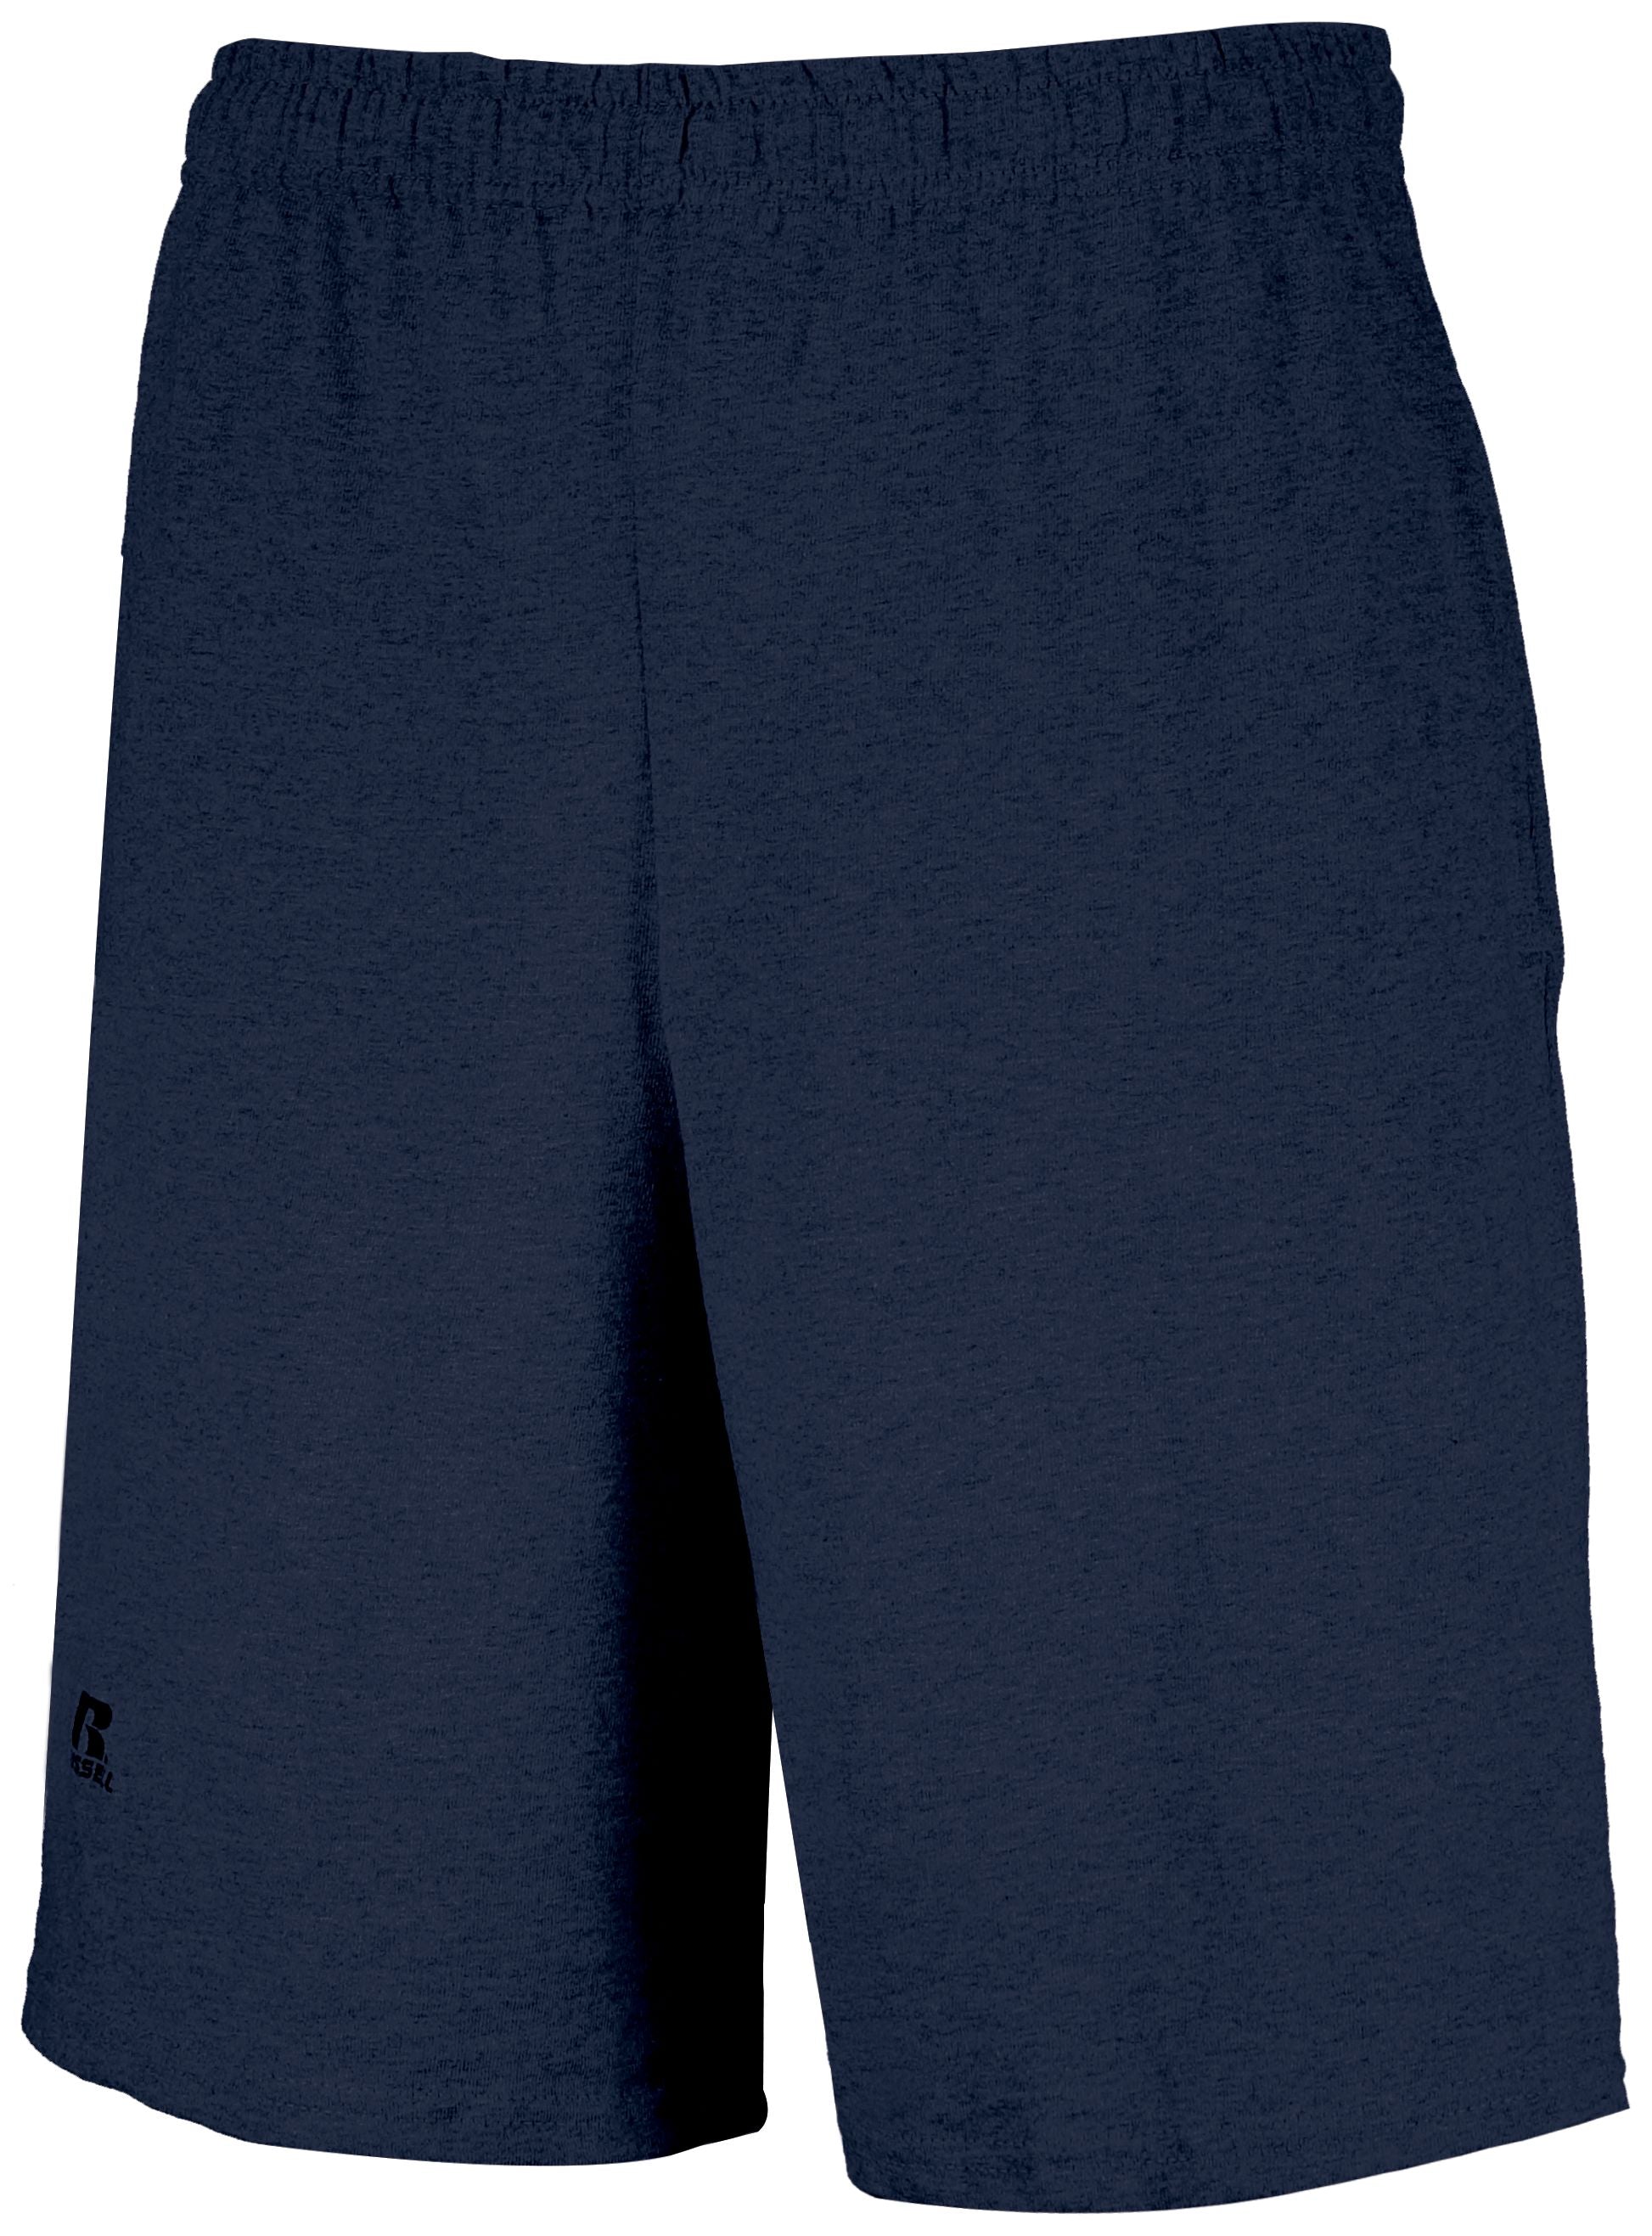 Russell Athletic Basic Cotton Pocket Shorts in Navy  -Part of the Adult, Adult-Shorts, Russell-Athletic-Products product lines at KanaleyCreations.com